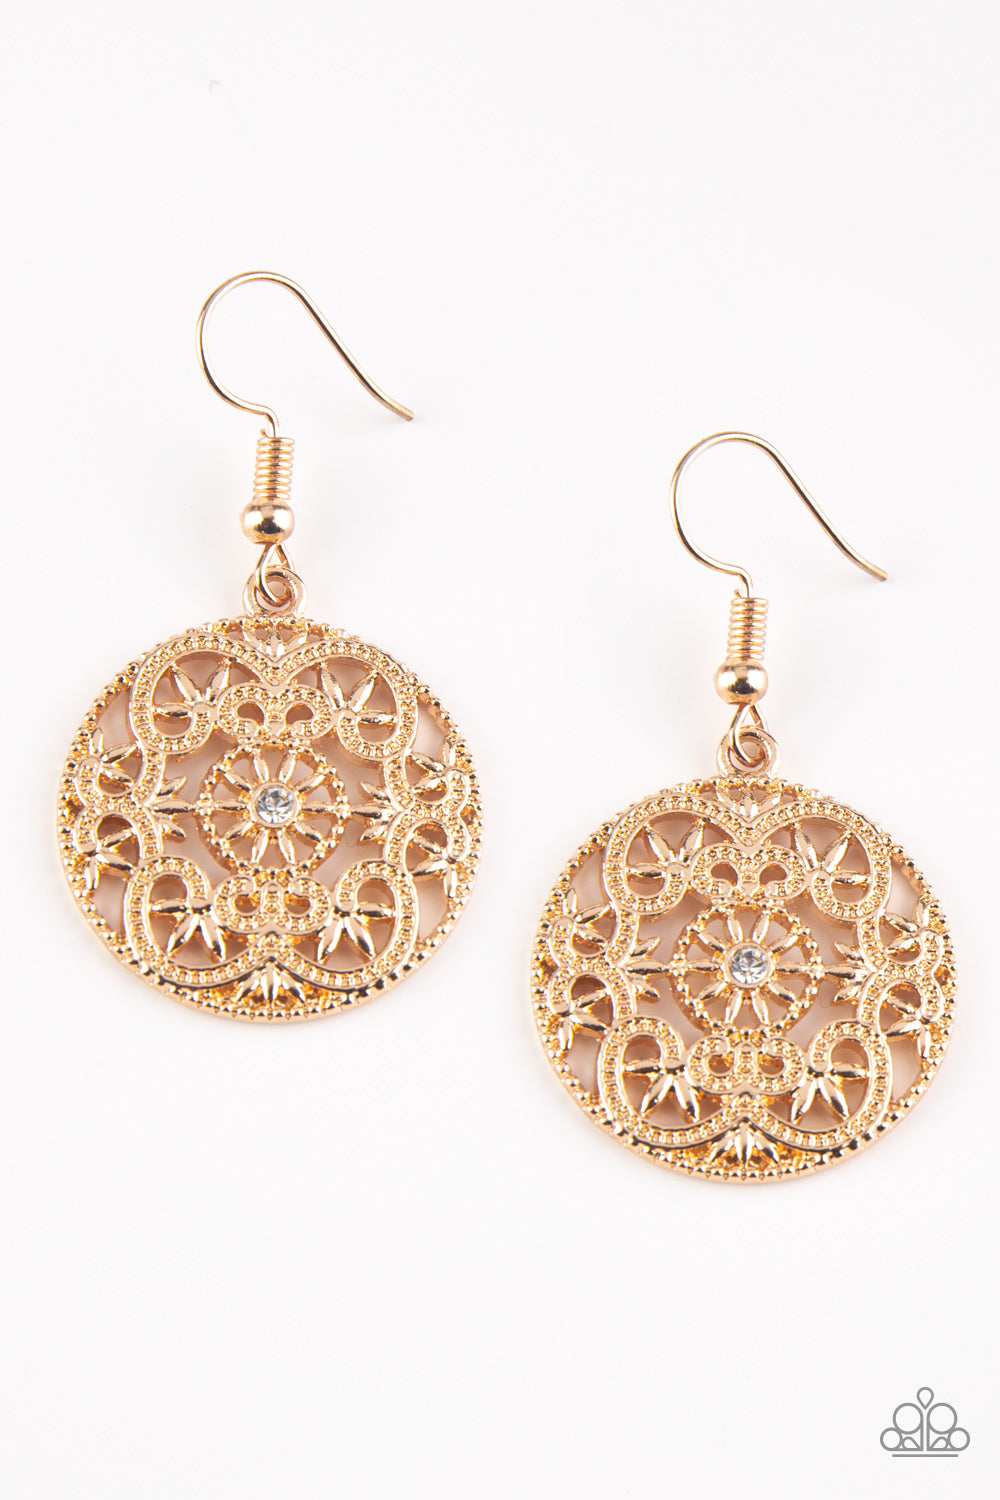 paparazzi-accessories-rochester-royale-gold-earrings